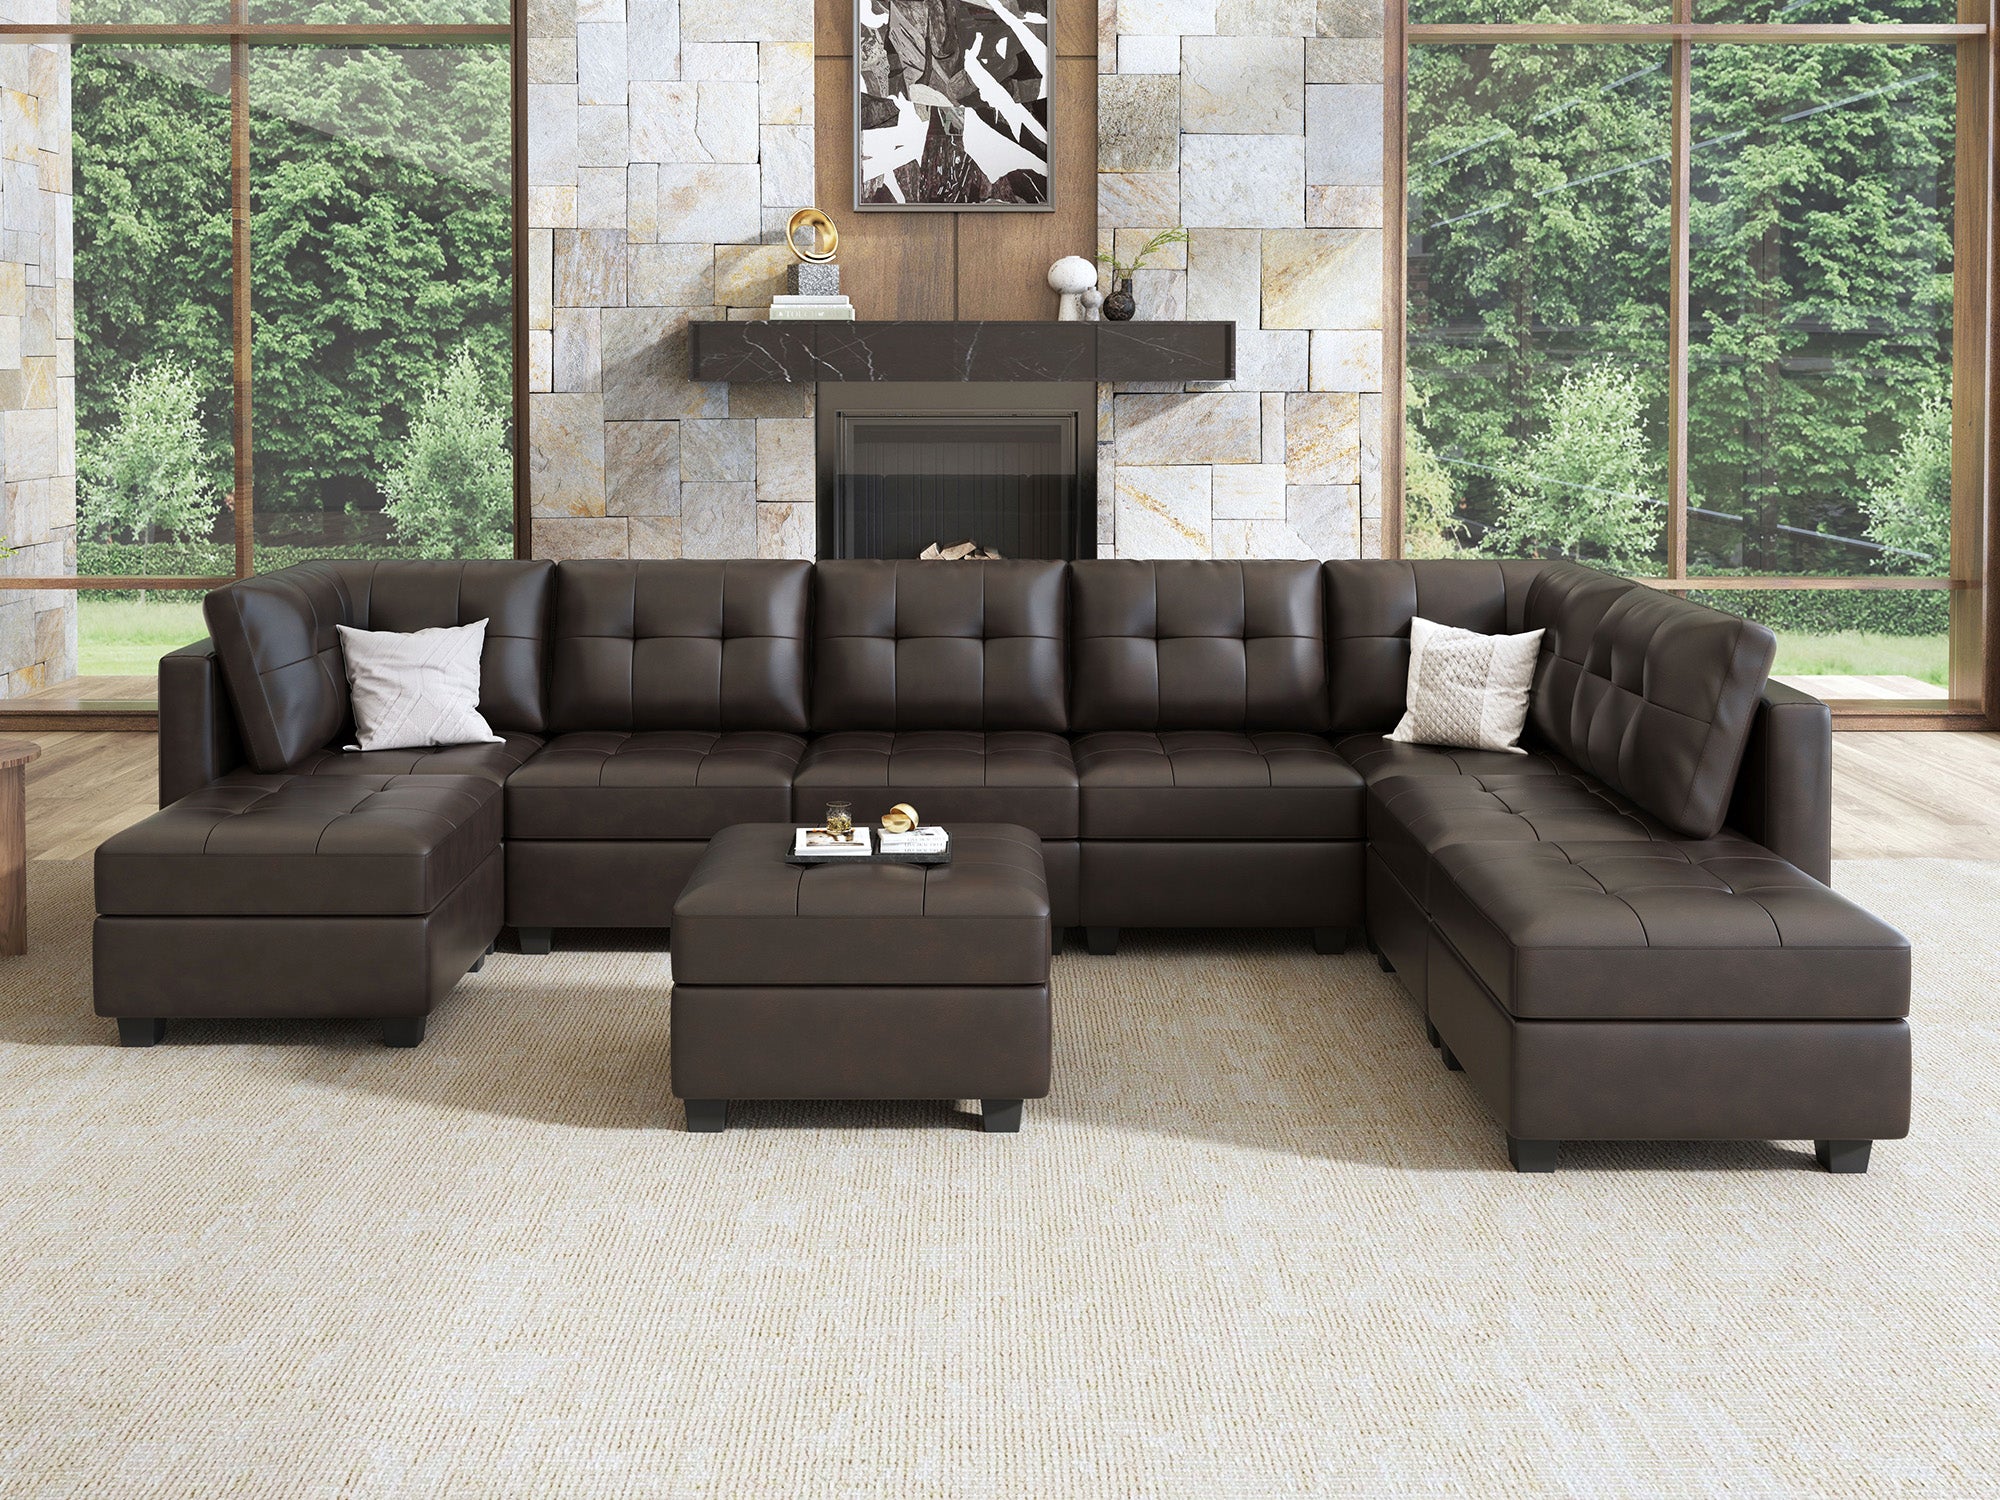 HONBAY 9-Piece Faux Leather Modular Sectional With Storage Seat